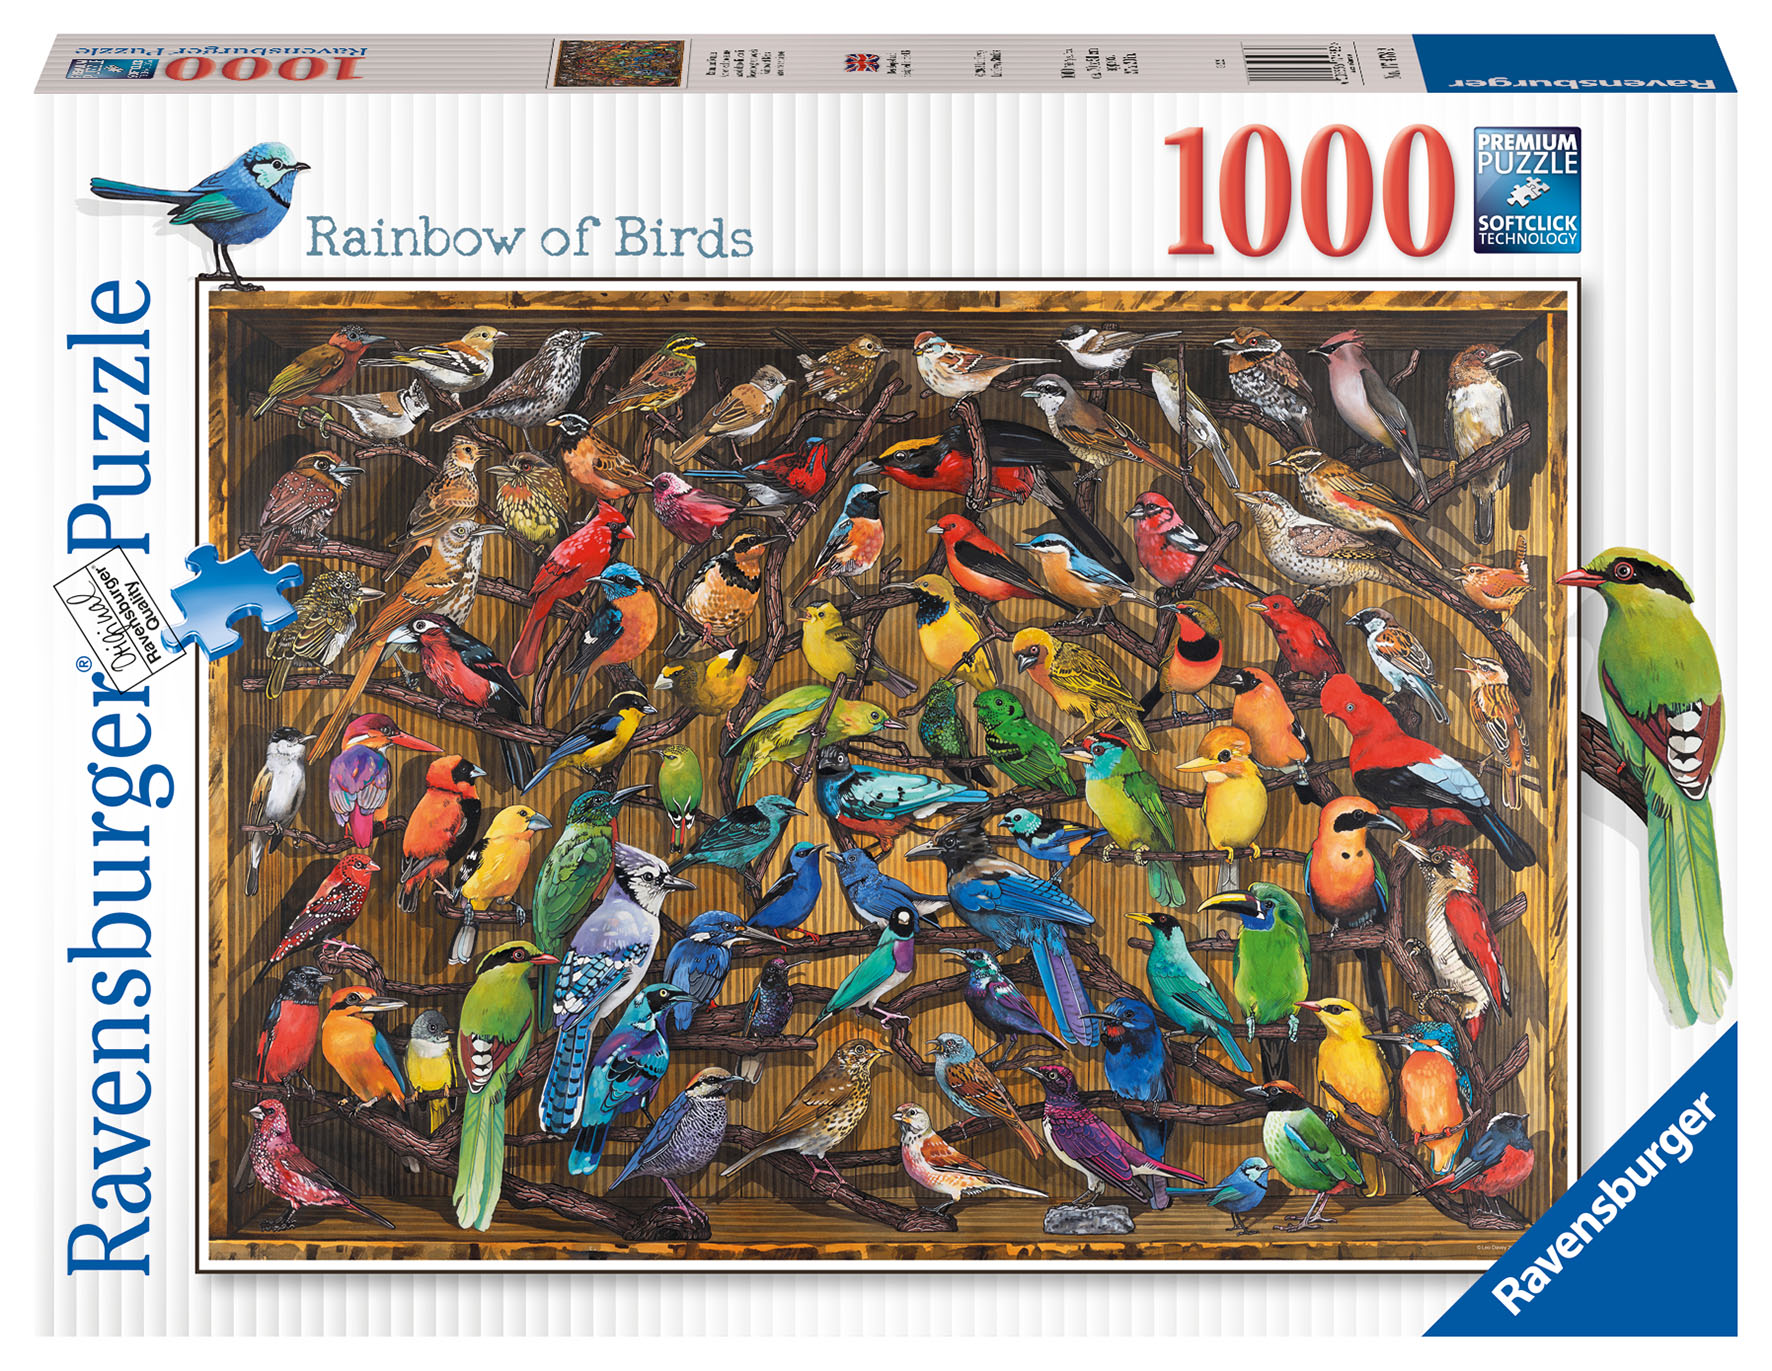 PUZZLE 1000 ARCOBALENO UCCELLI